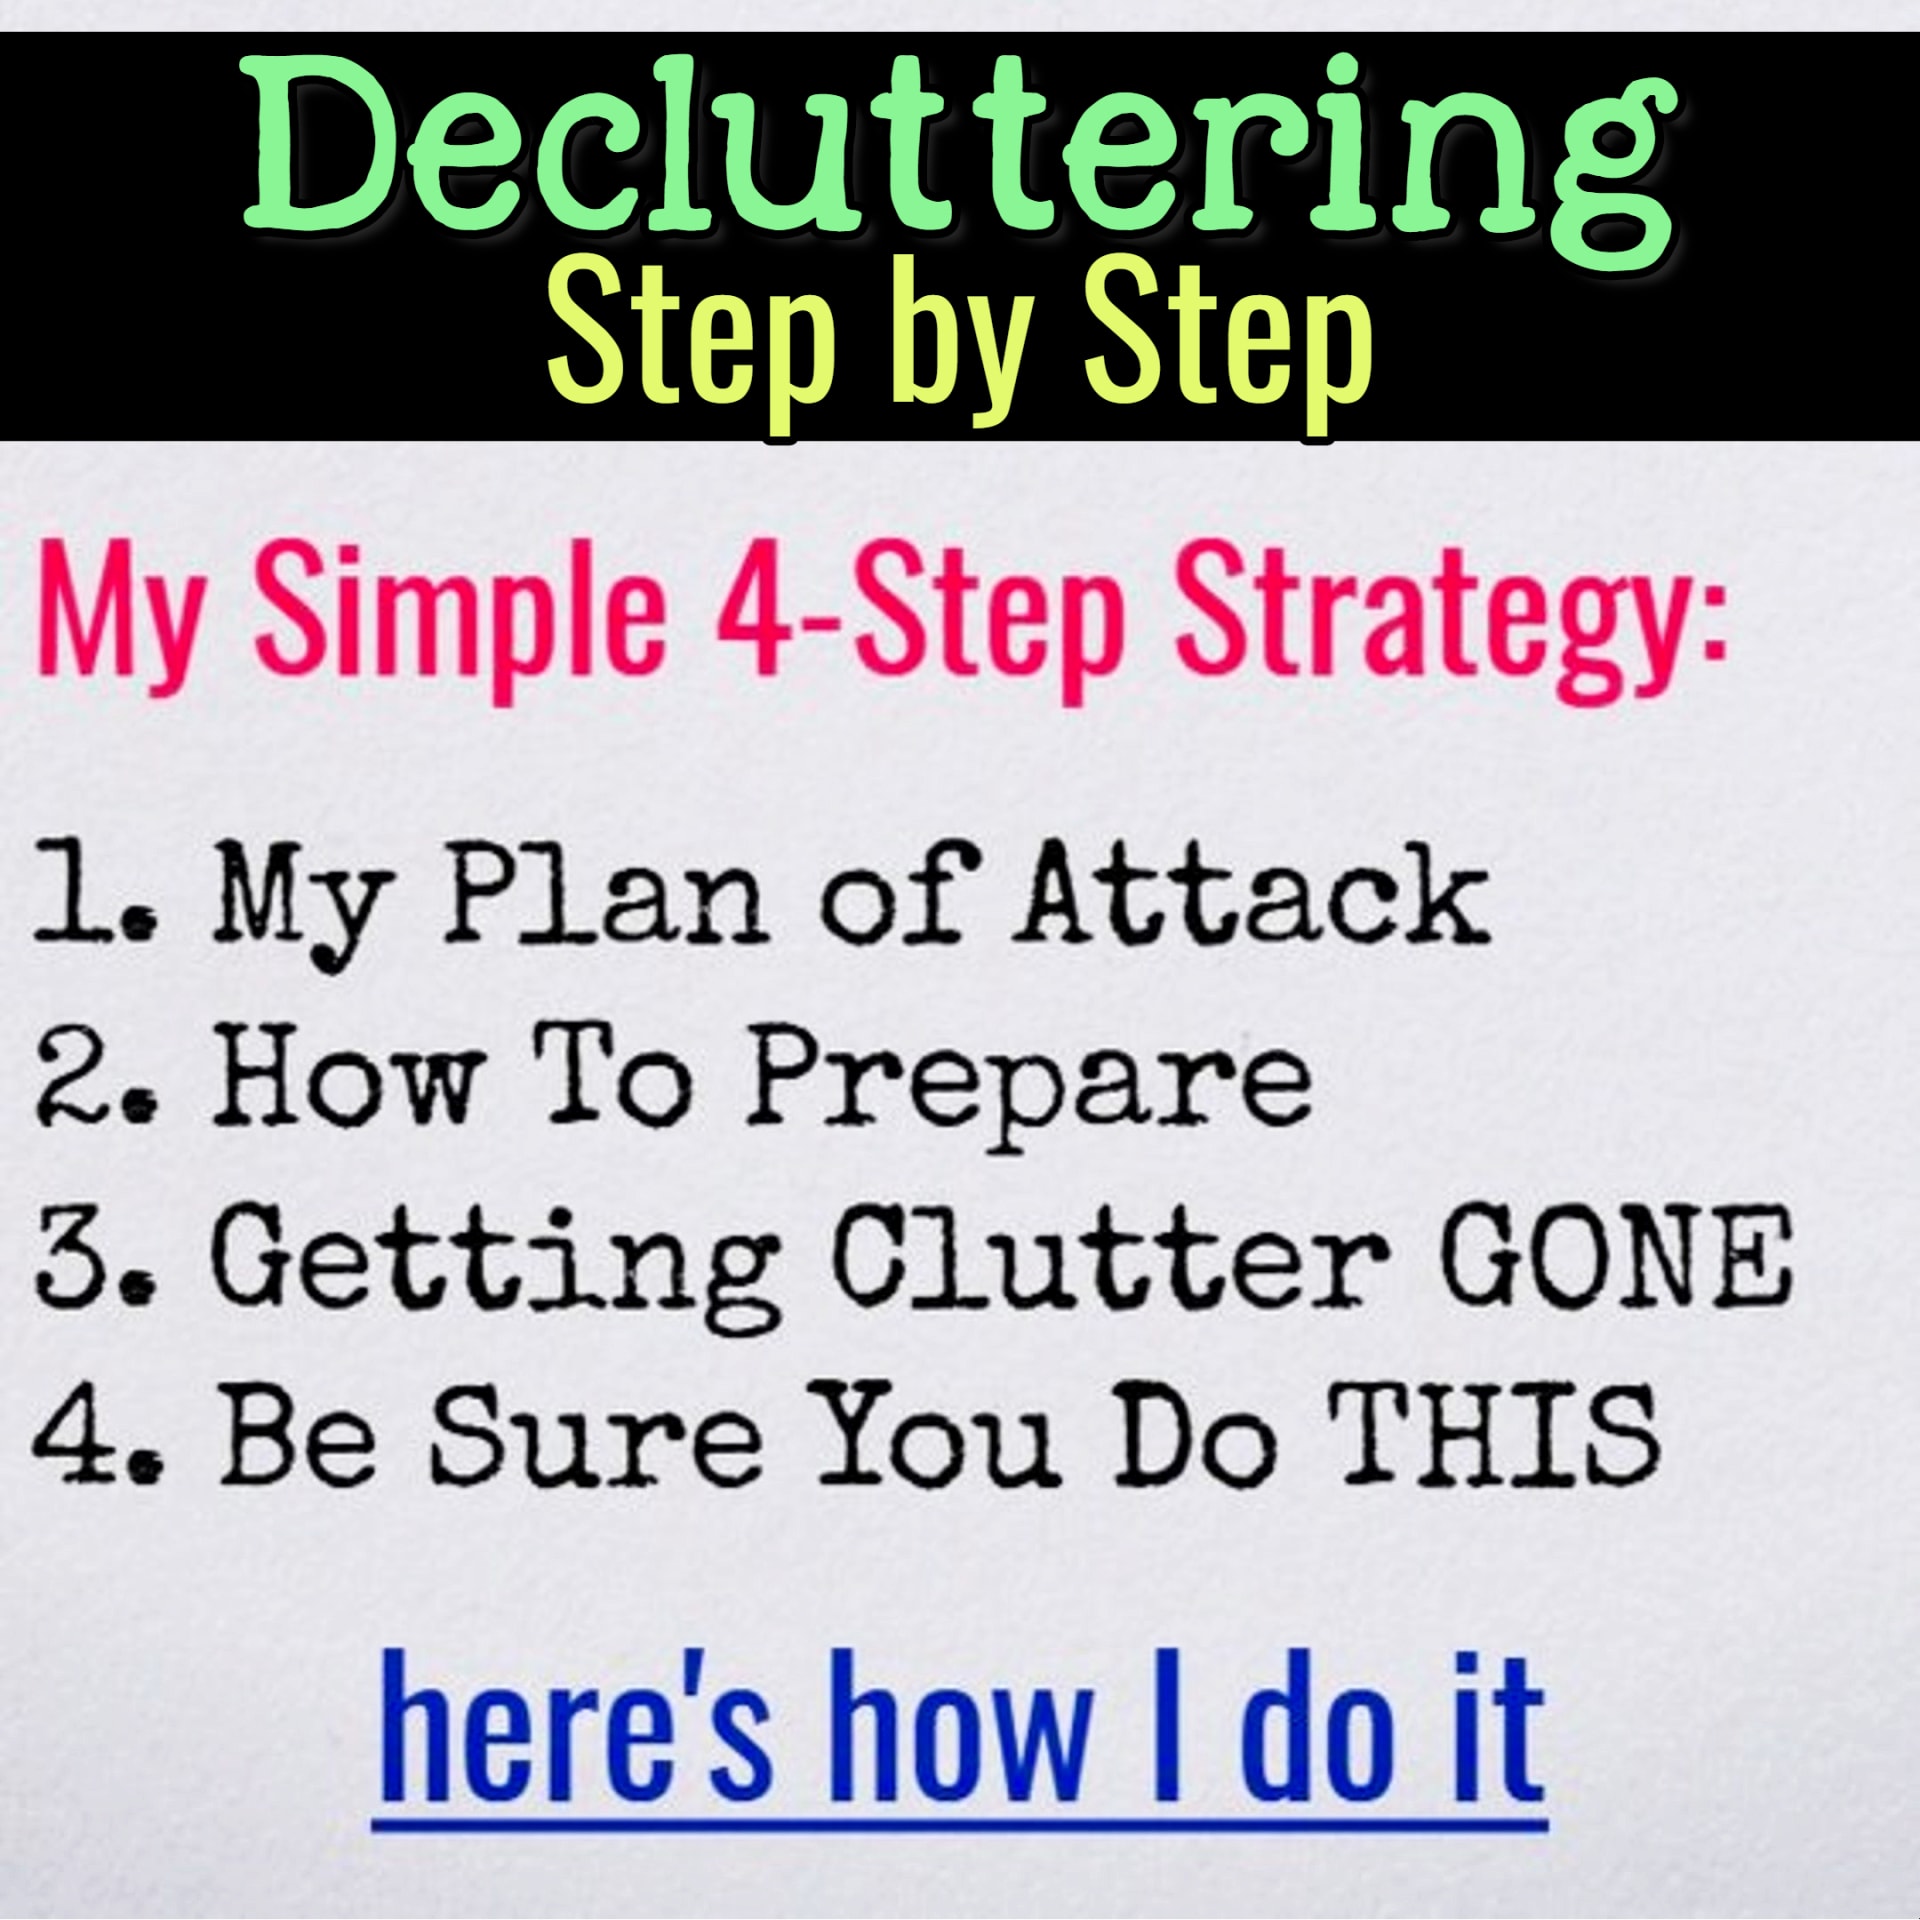 Decluttering Step By Step - Organizing Ideas For The Home - Decluttering Ideas if you're feeling overwhelmed - where to start decluttering and organizing your messy house - decluttering step by step to declutter and organize without feeling overwhelmed 